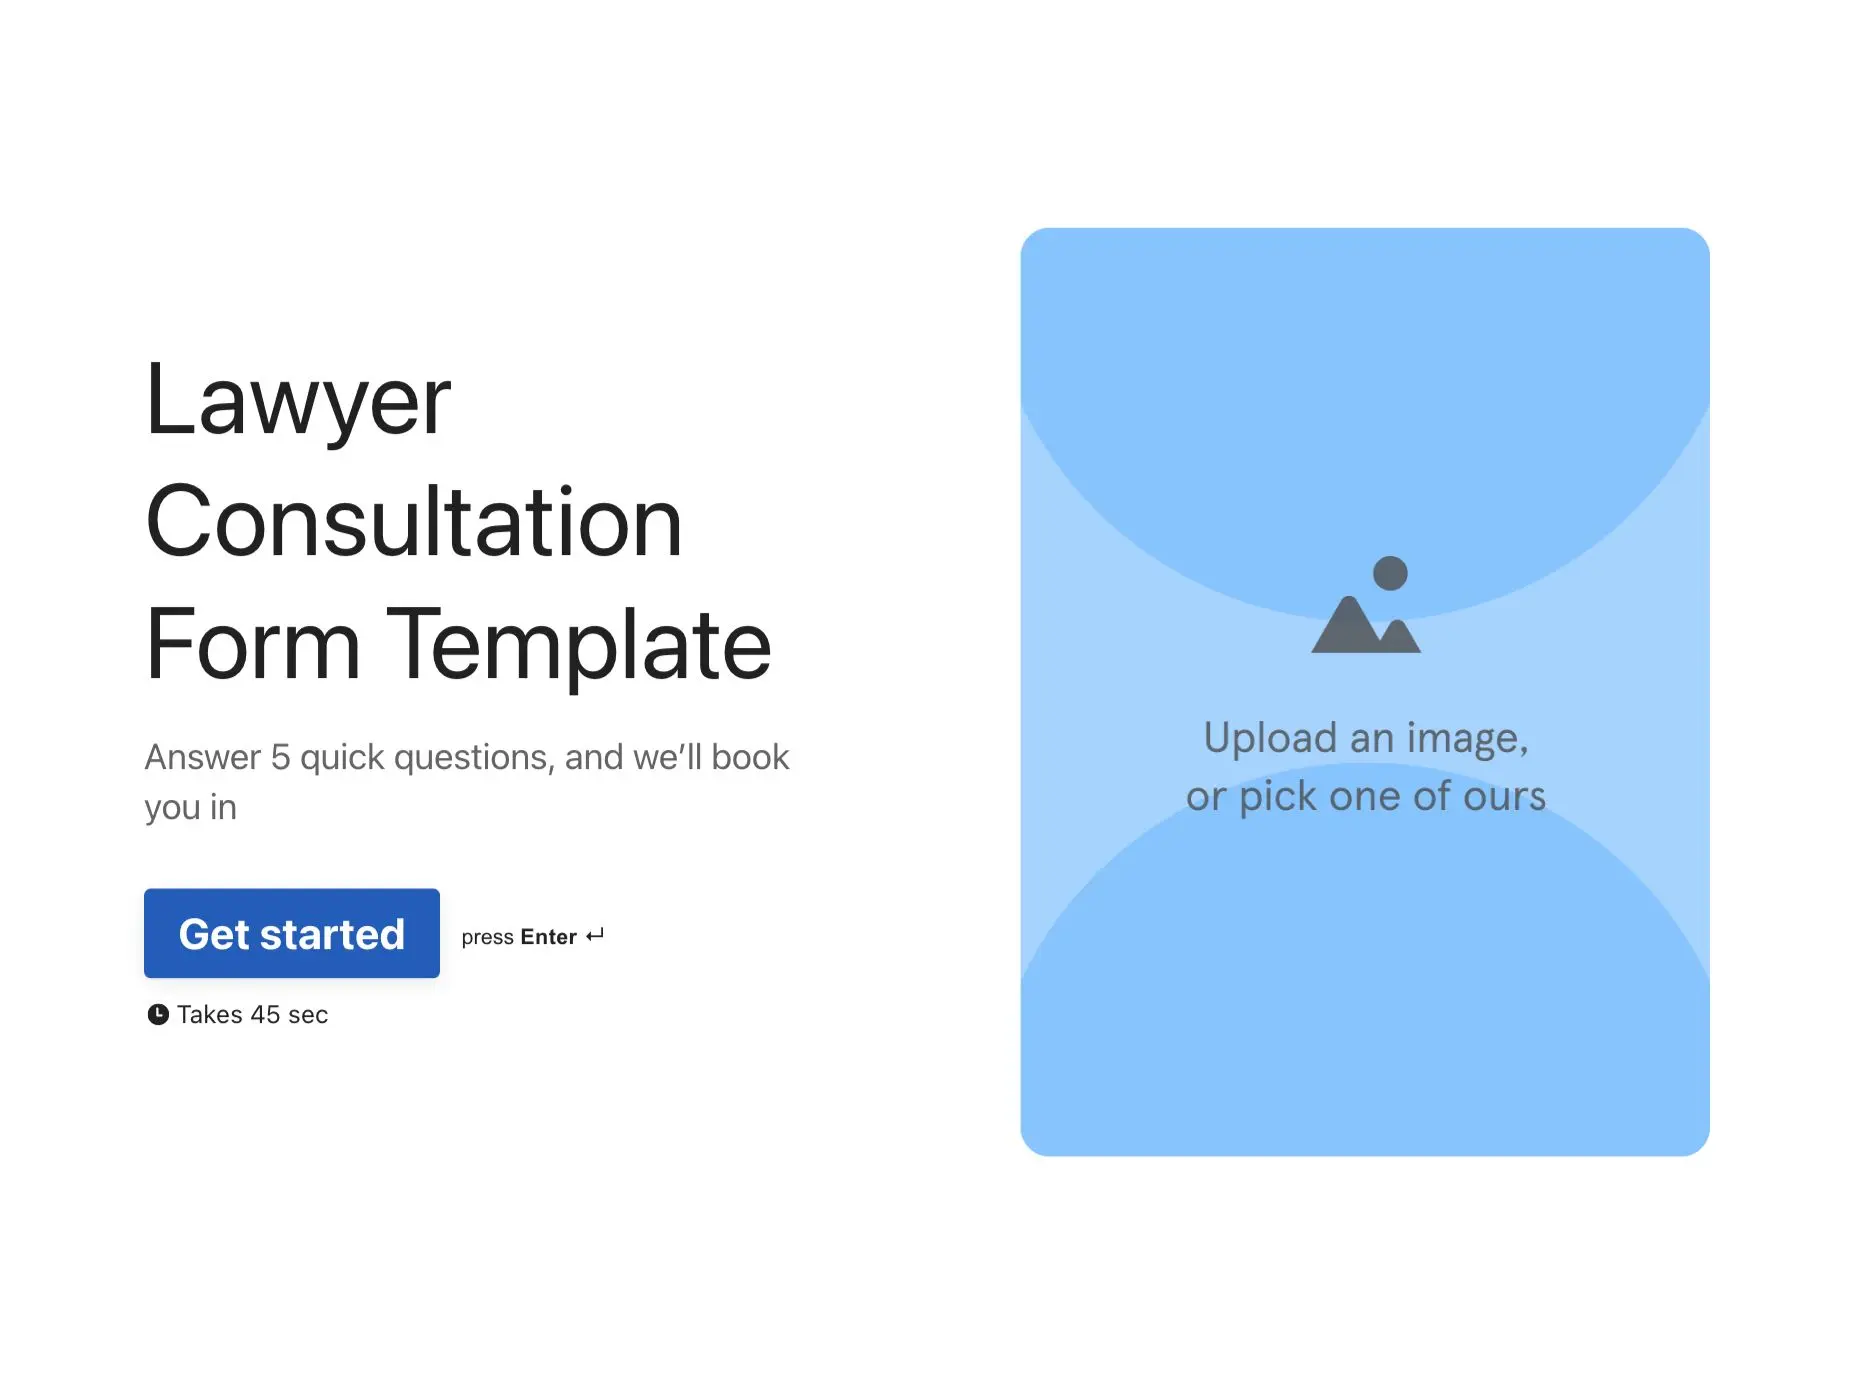 Lawyer Consultation Form Template Hero